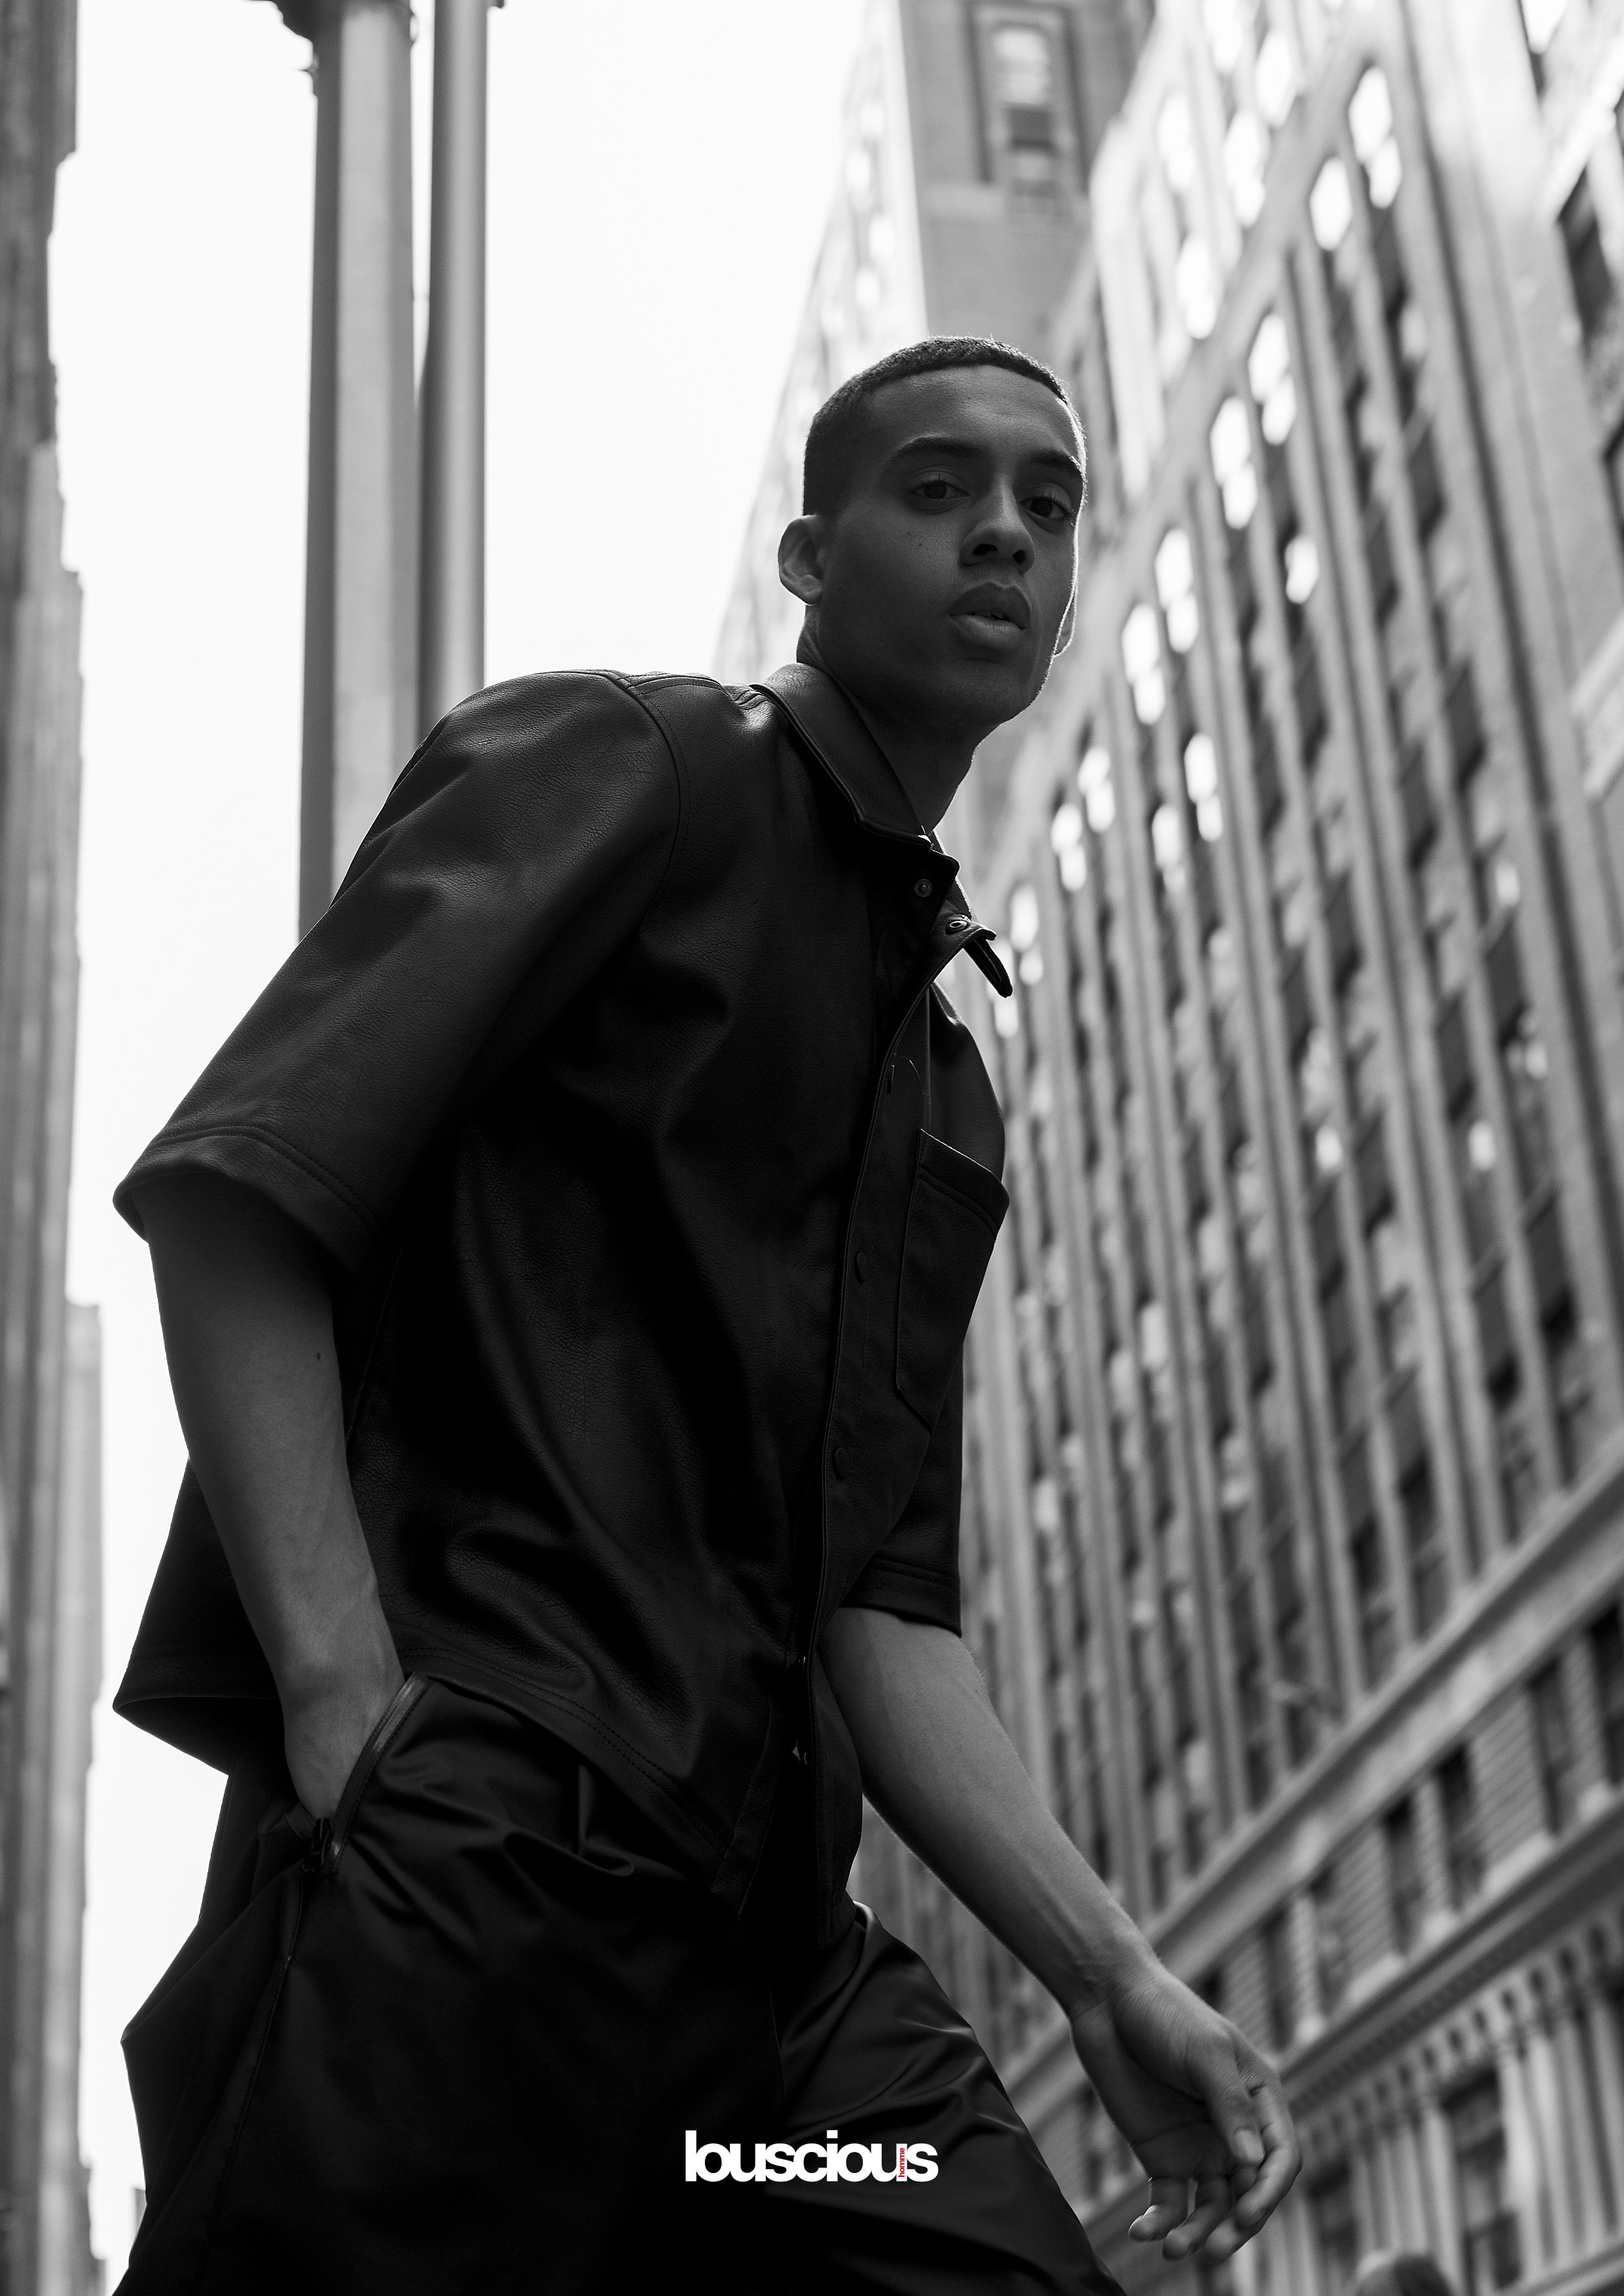 Louscious Homme Online Editorial - New York by Gato Rivero_3.jpg